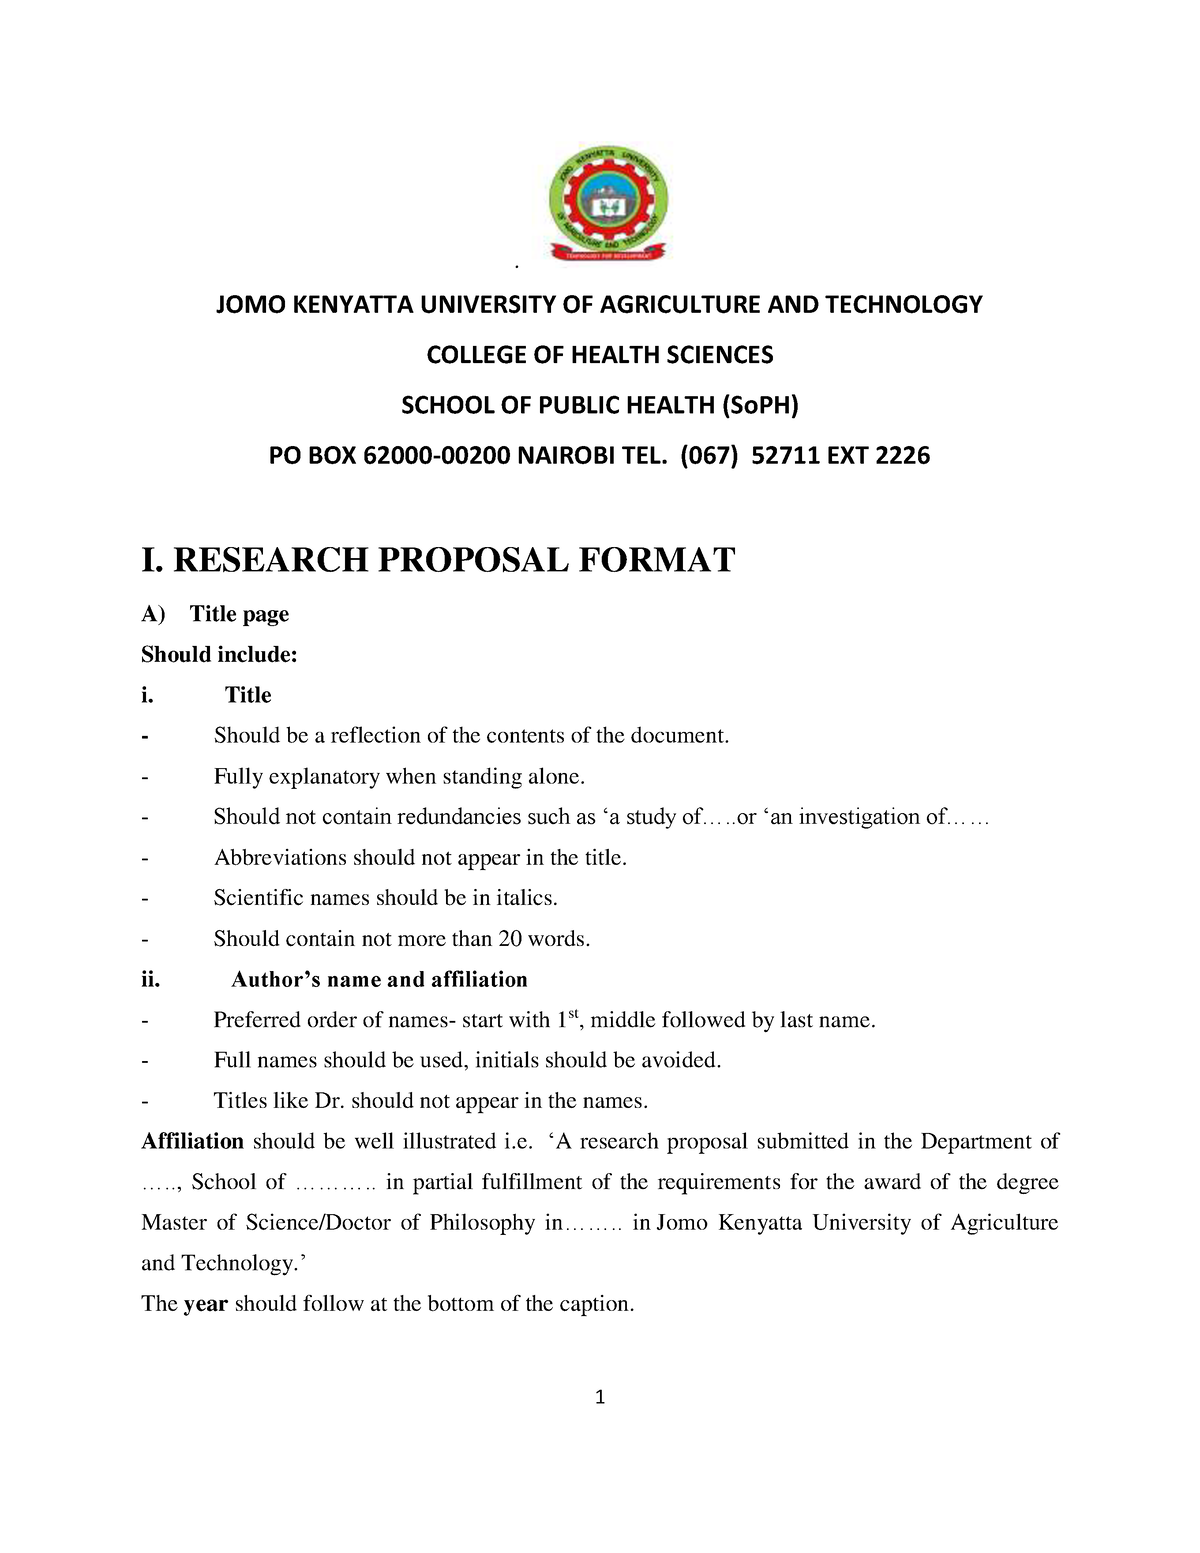 research proposal example in kenya